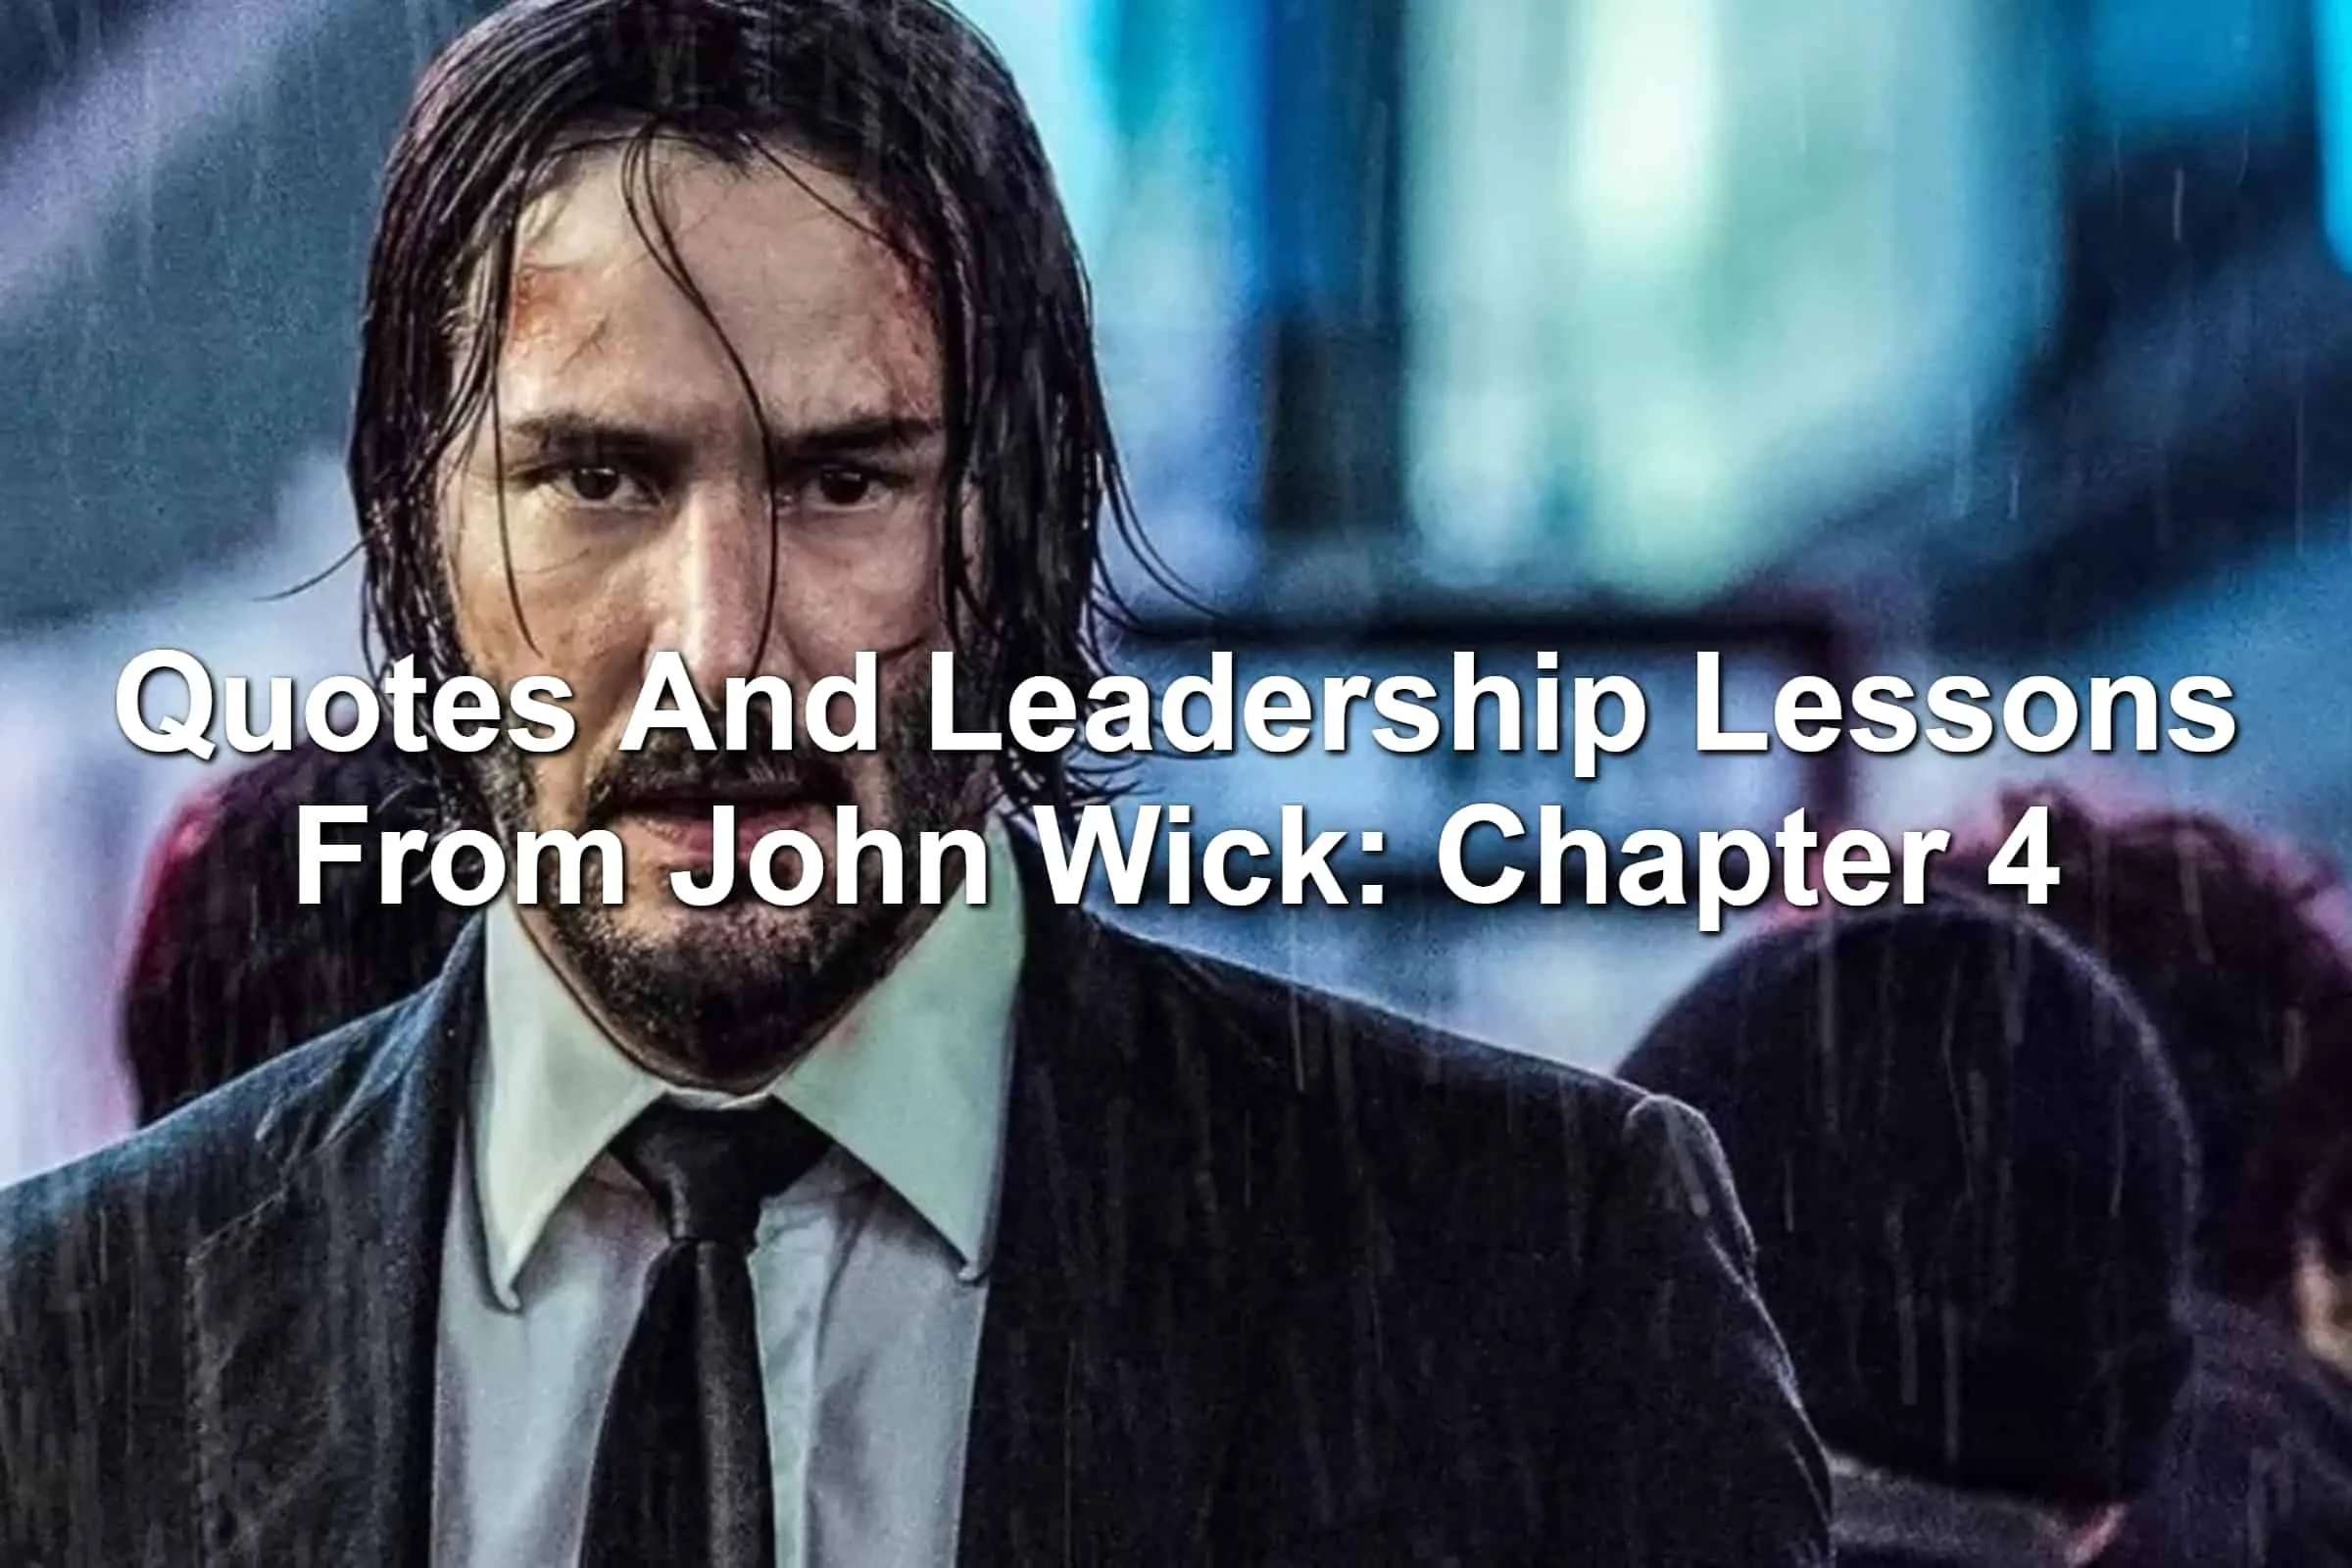 6 Leadership Lessons You Don't Want to Learn the Hard Way